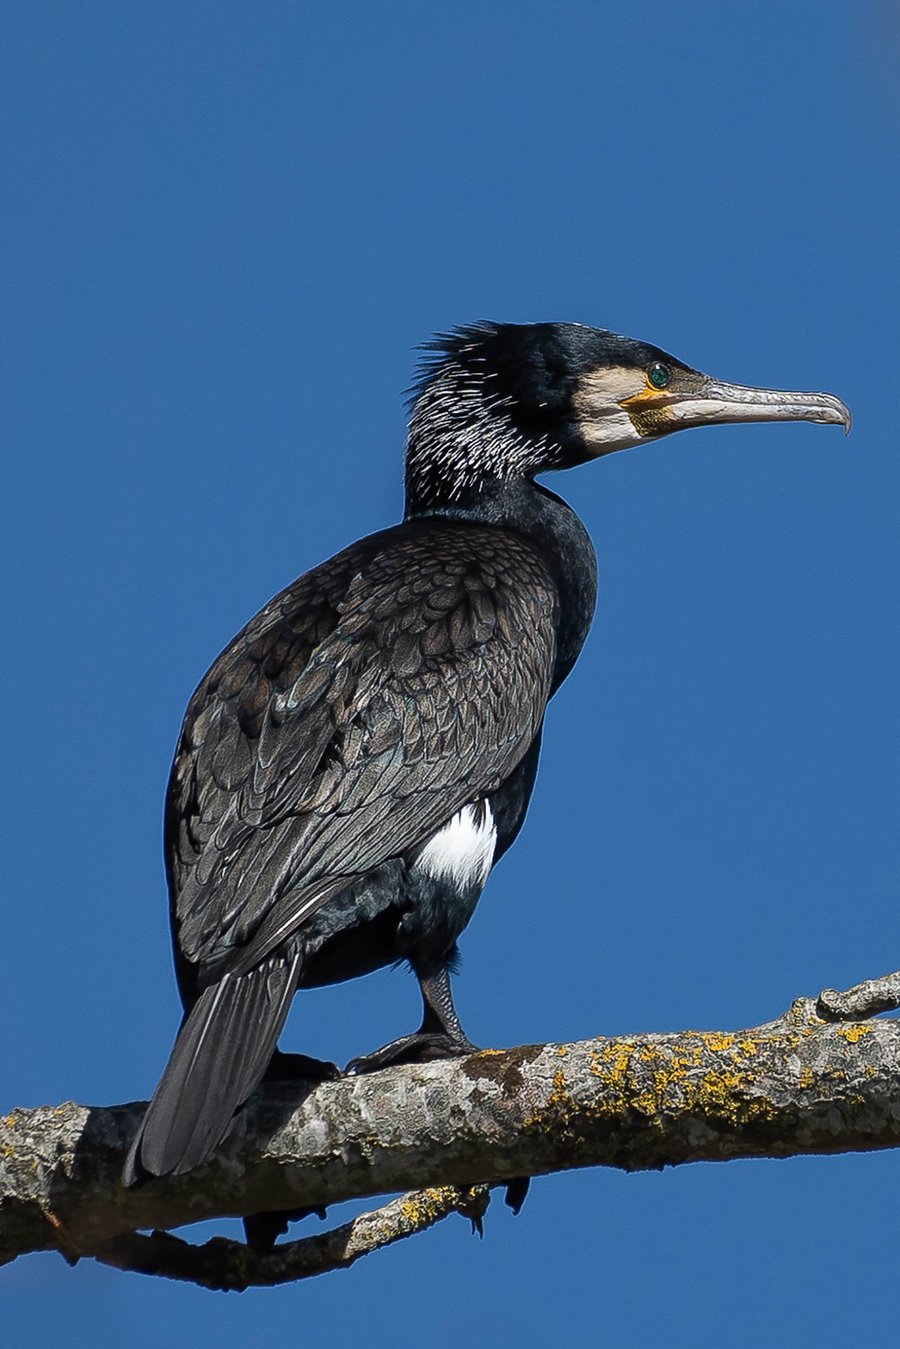 Limited Edition Hand-Signed Mounted Photo of a Cormorant